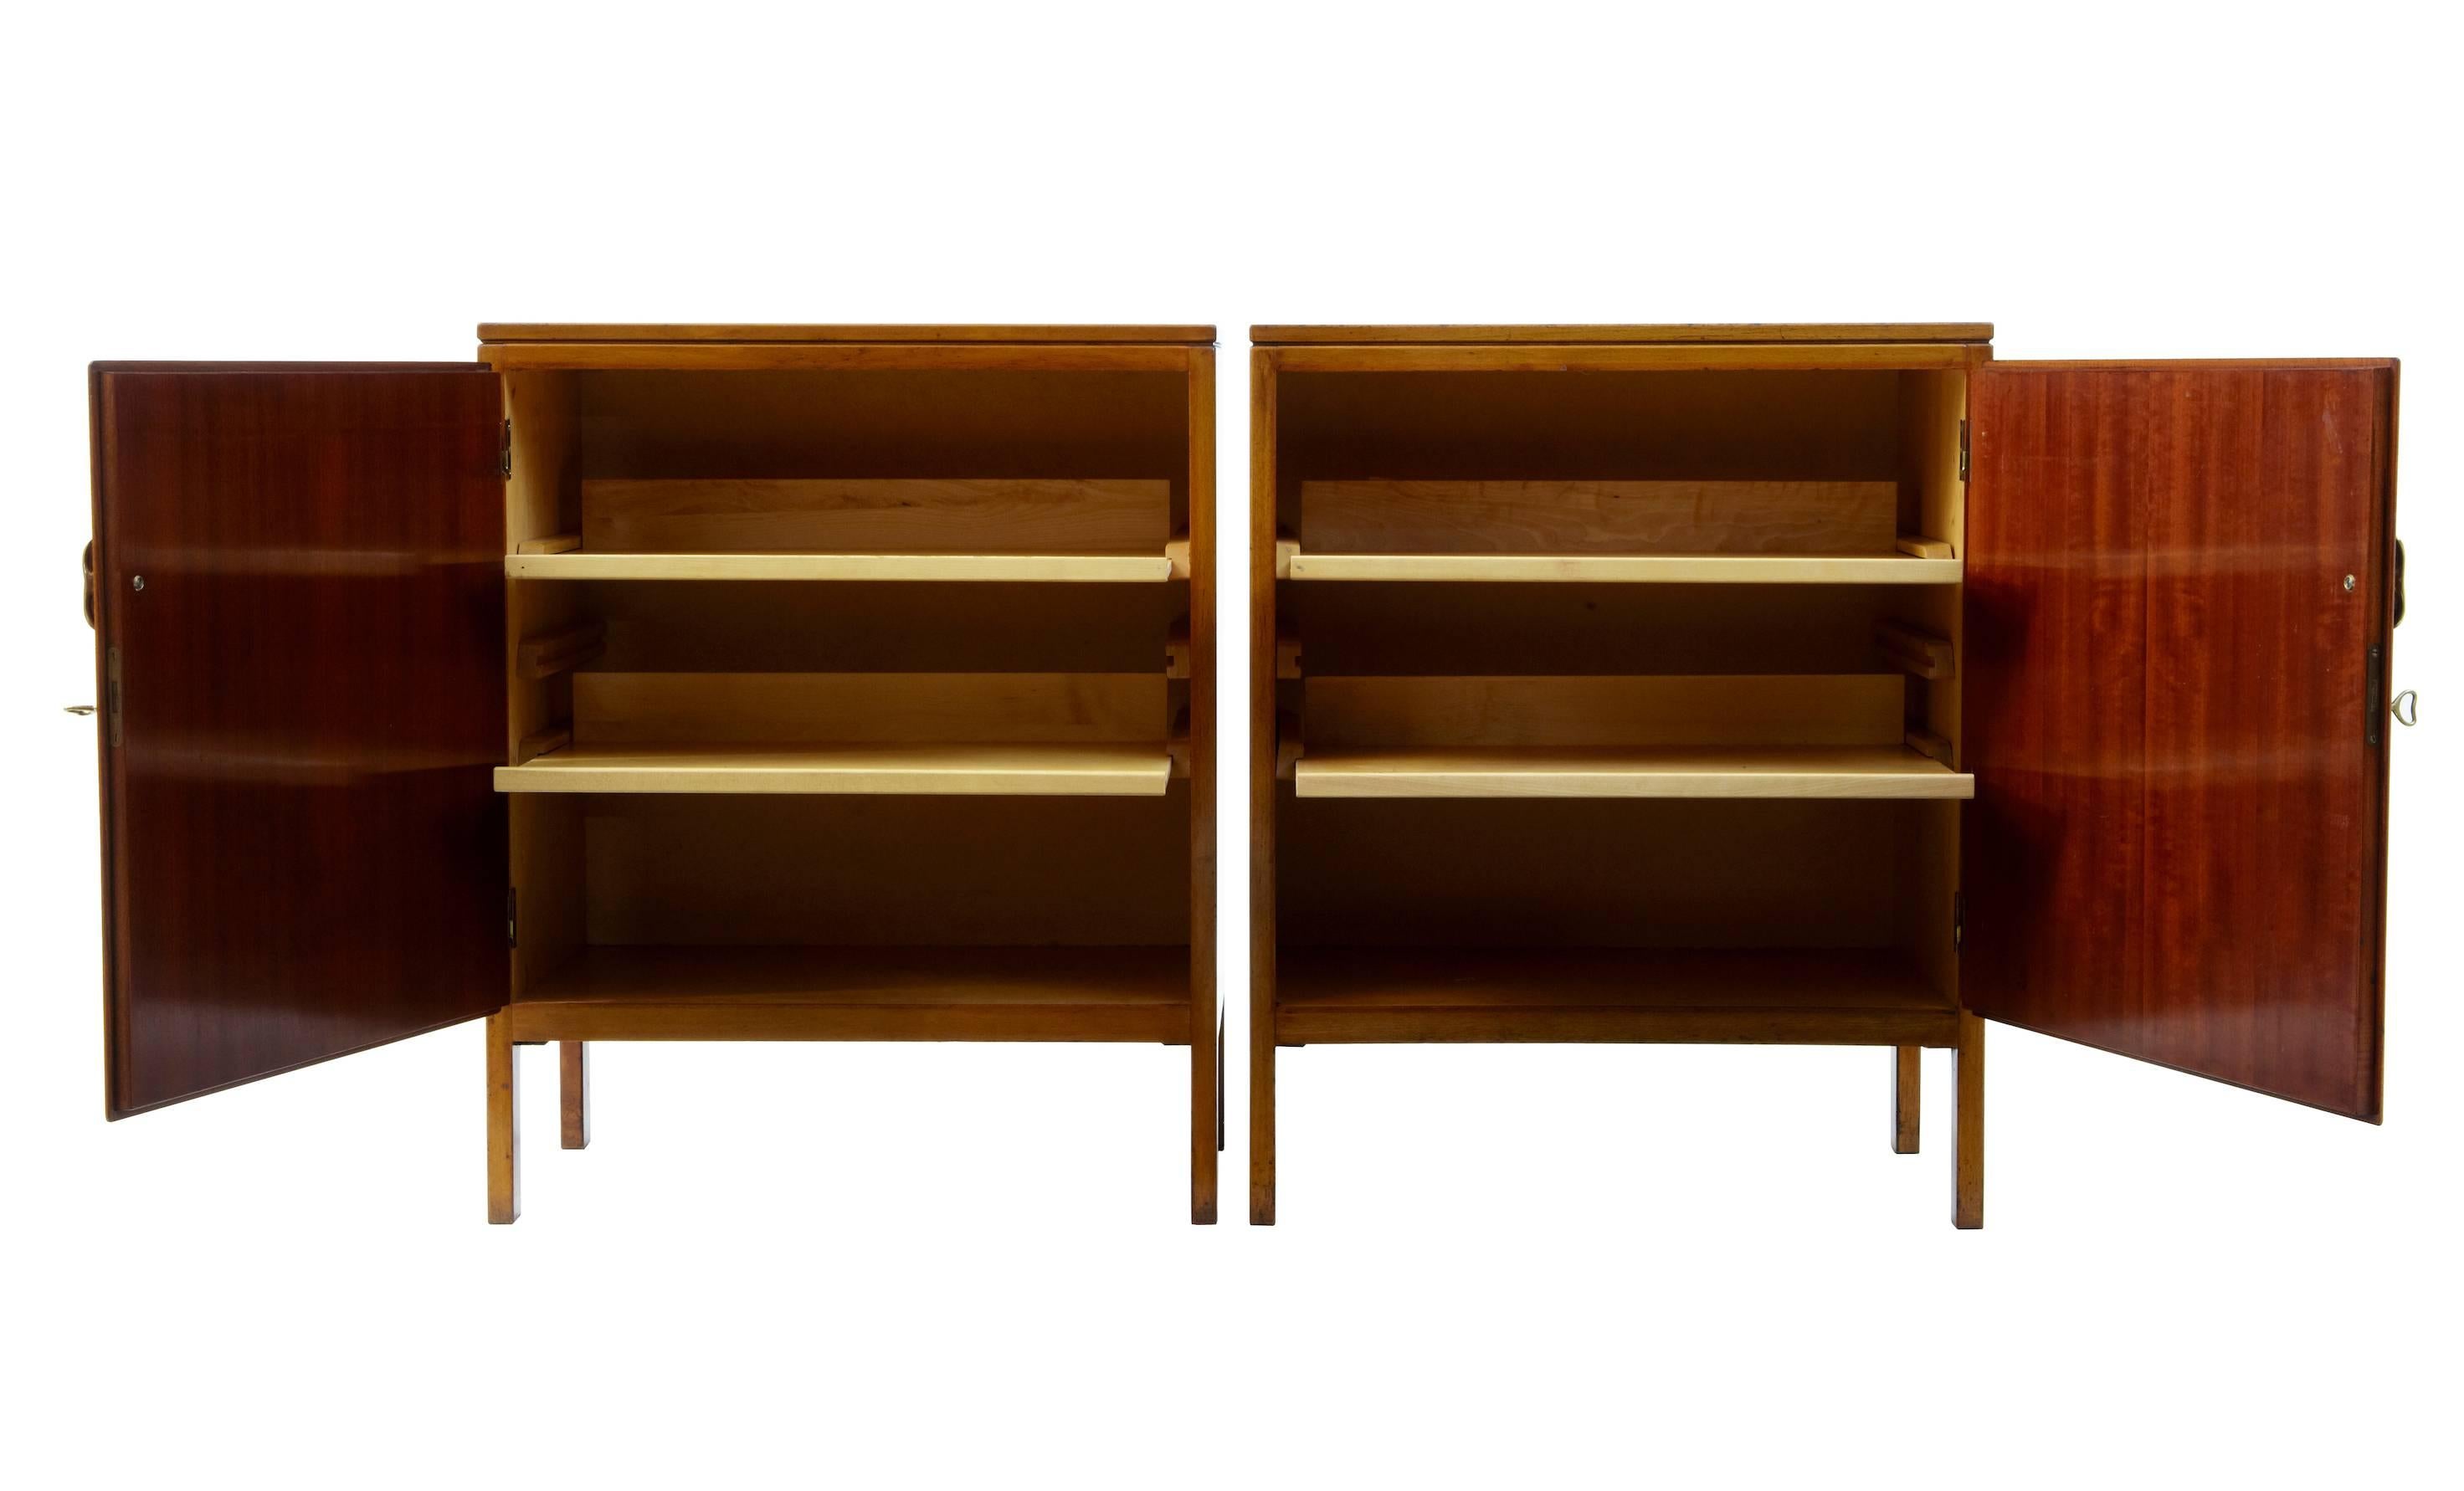 Fine pair of david rosen designed cabinets produced by nordiska kompaniet circa 1955.
Cross banded top.
Left and right opening doors, reveal 2 press drawers.
Labelled and stamped on the reverse.
Evidence of use with surface marks (please see